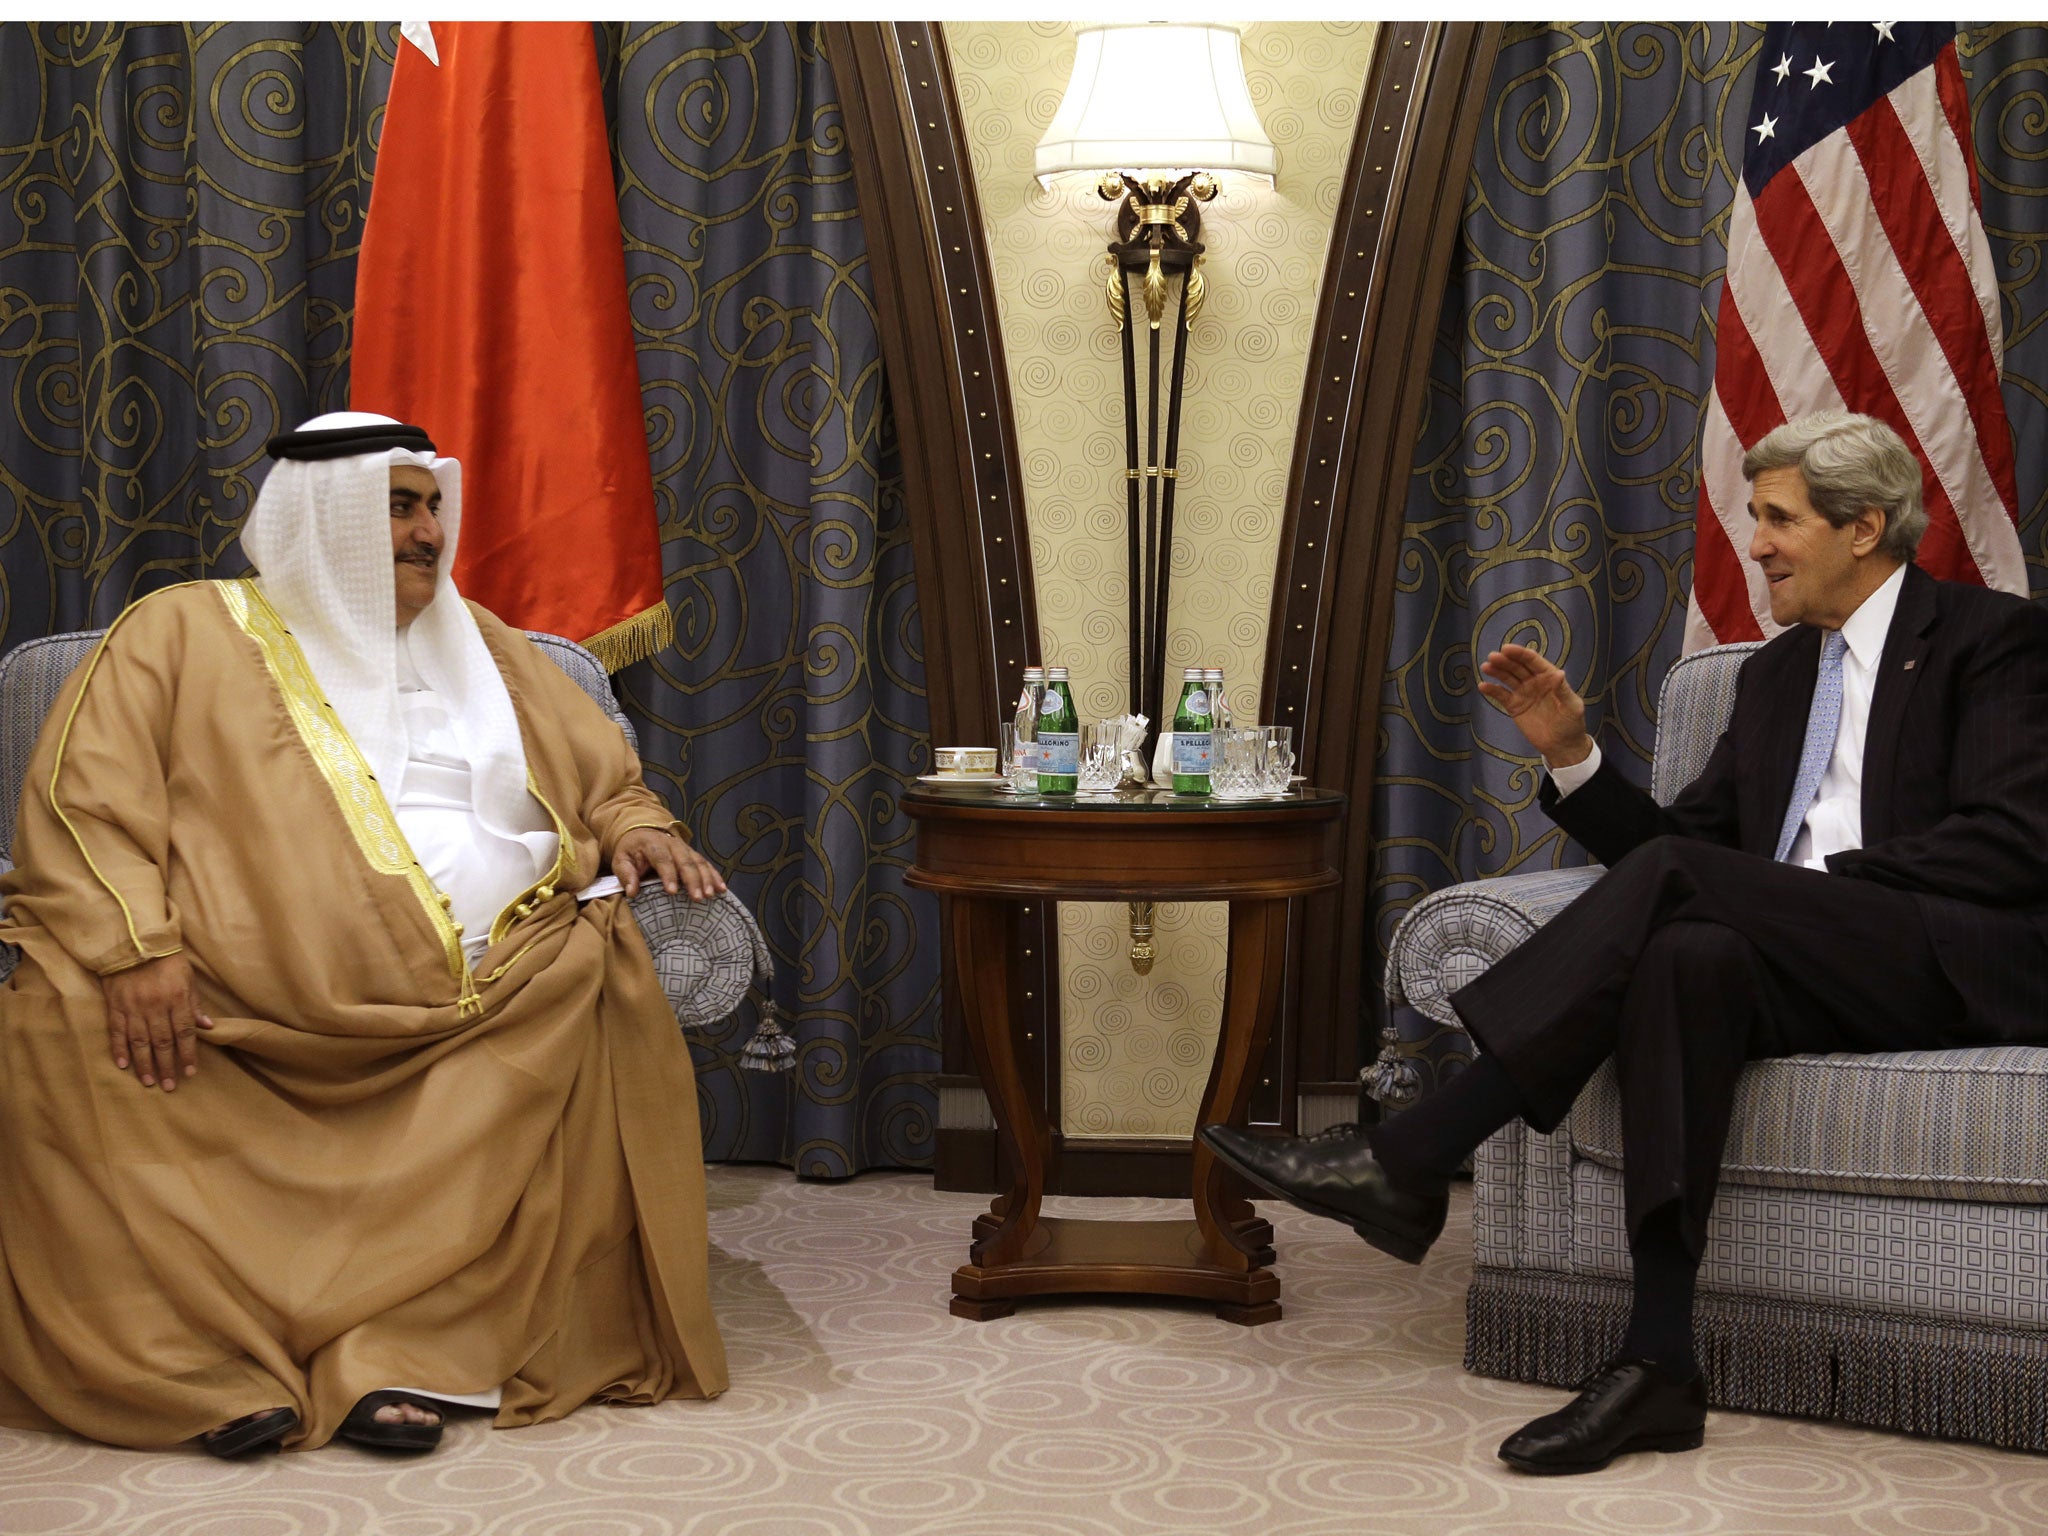 U.S. Secretary of State John Kerry (R) meets with Bahraini Foreign Minister Sheikh Khalid al-Khalifa at a hotel in the Saudi capital Riyadh on March 4, 2013. Saudi Arabia is the seventh leg of Kerry's first official overseas trip.